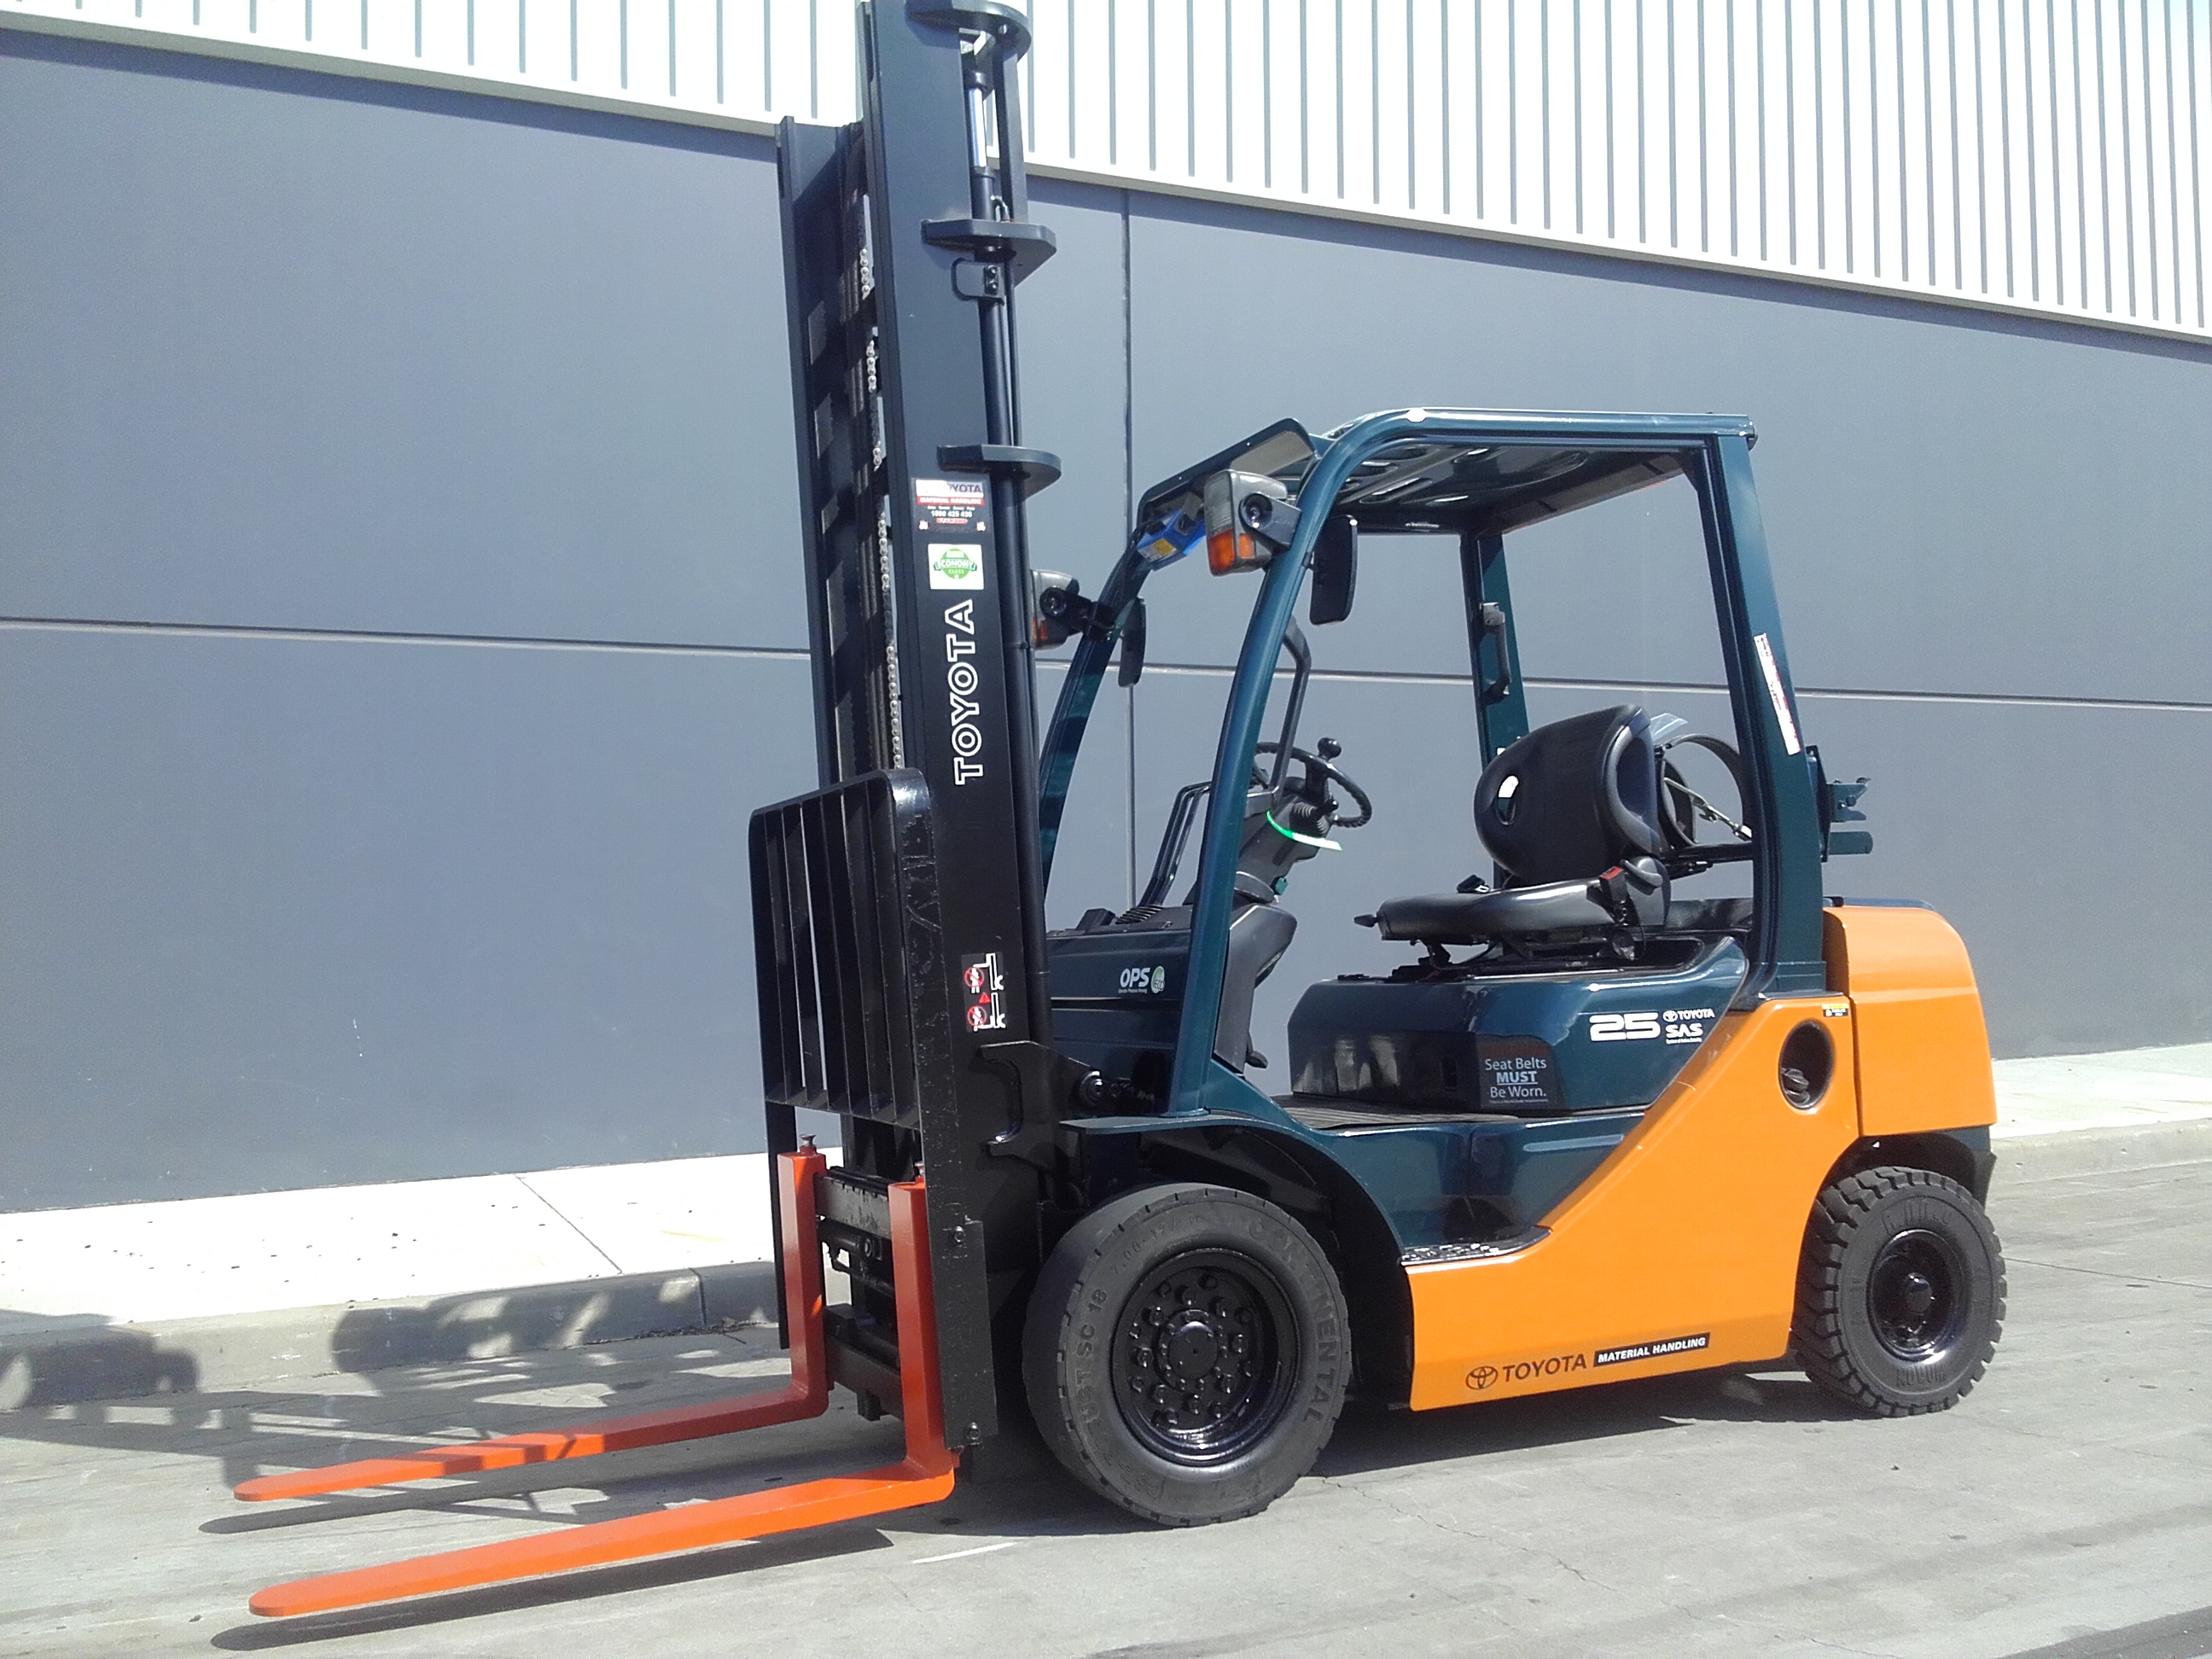 Counterbalance forklift